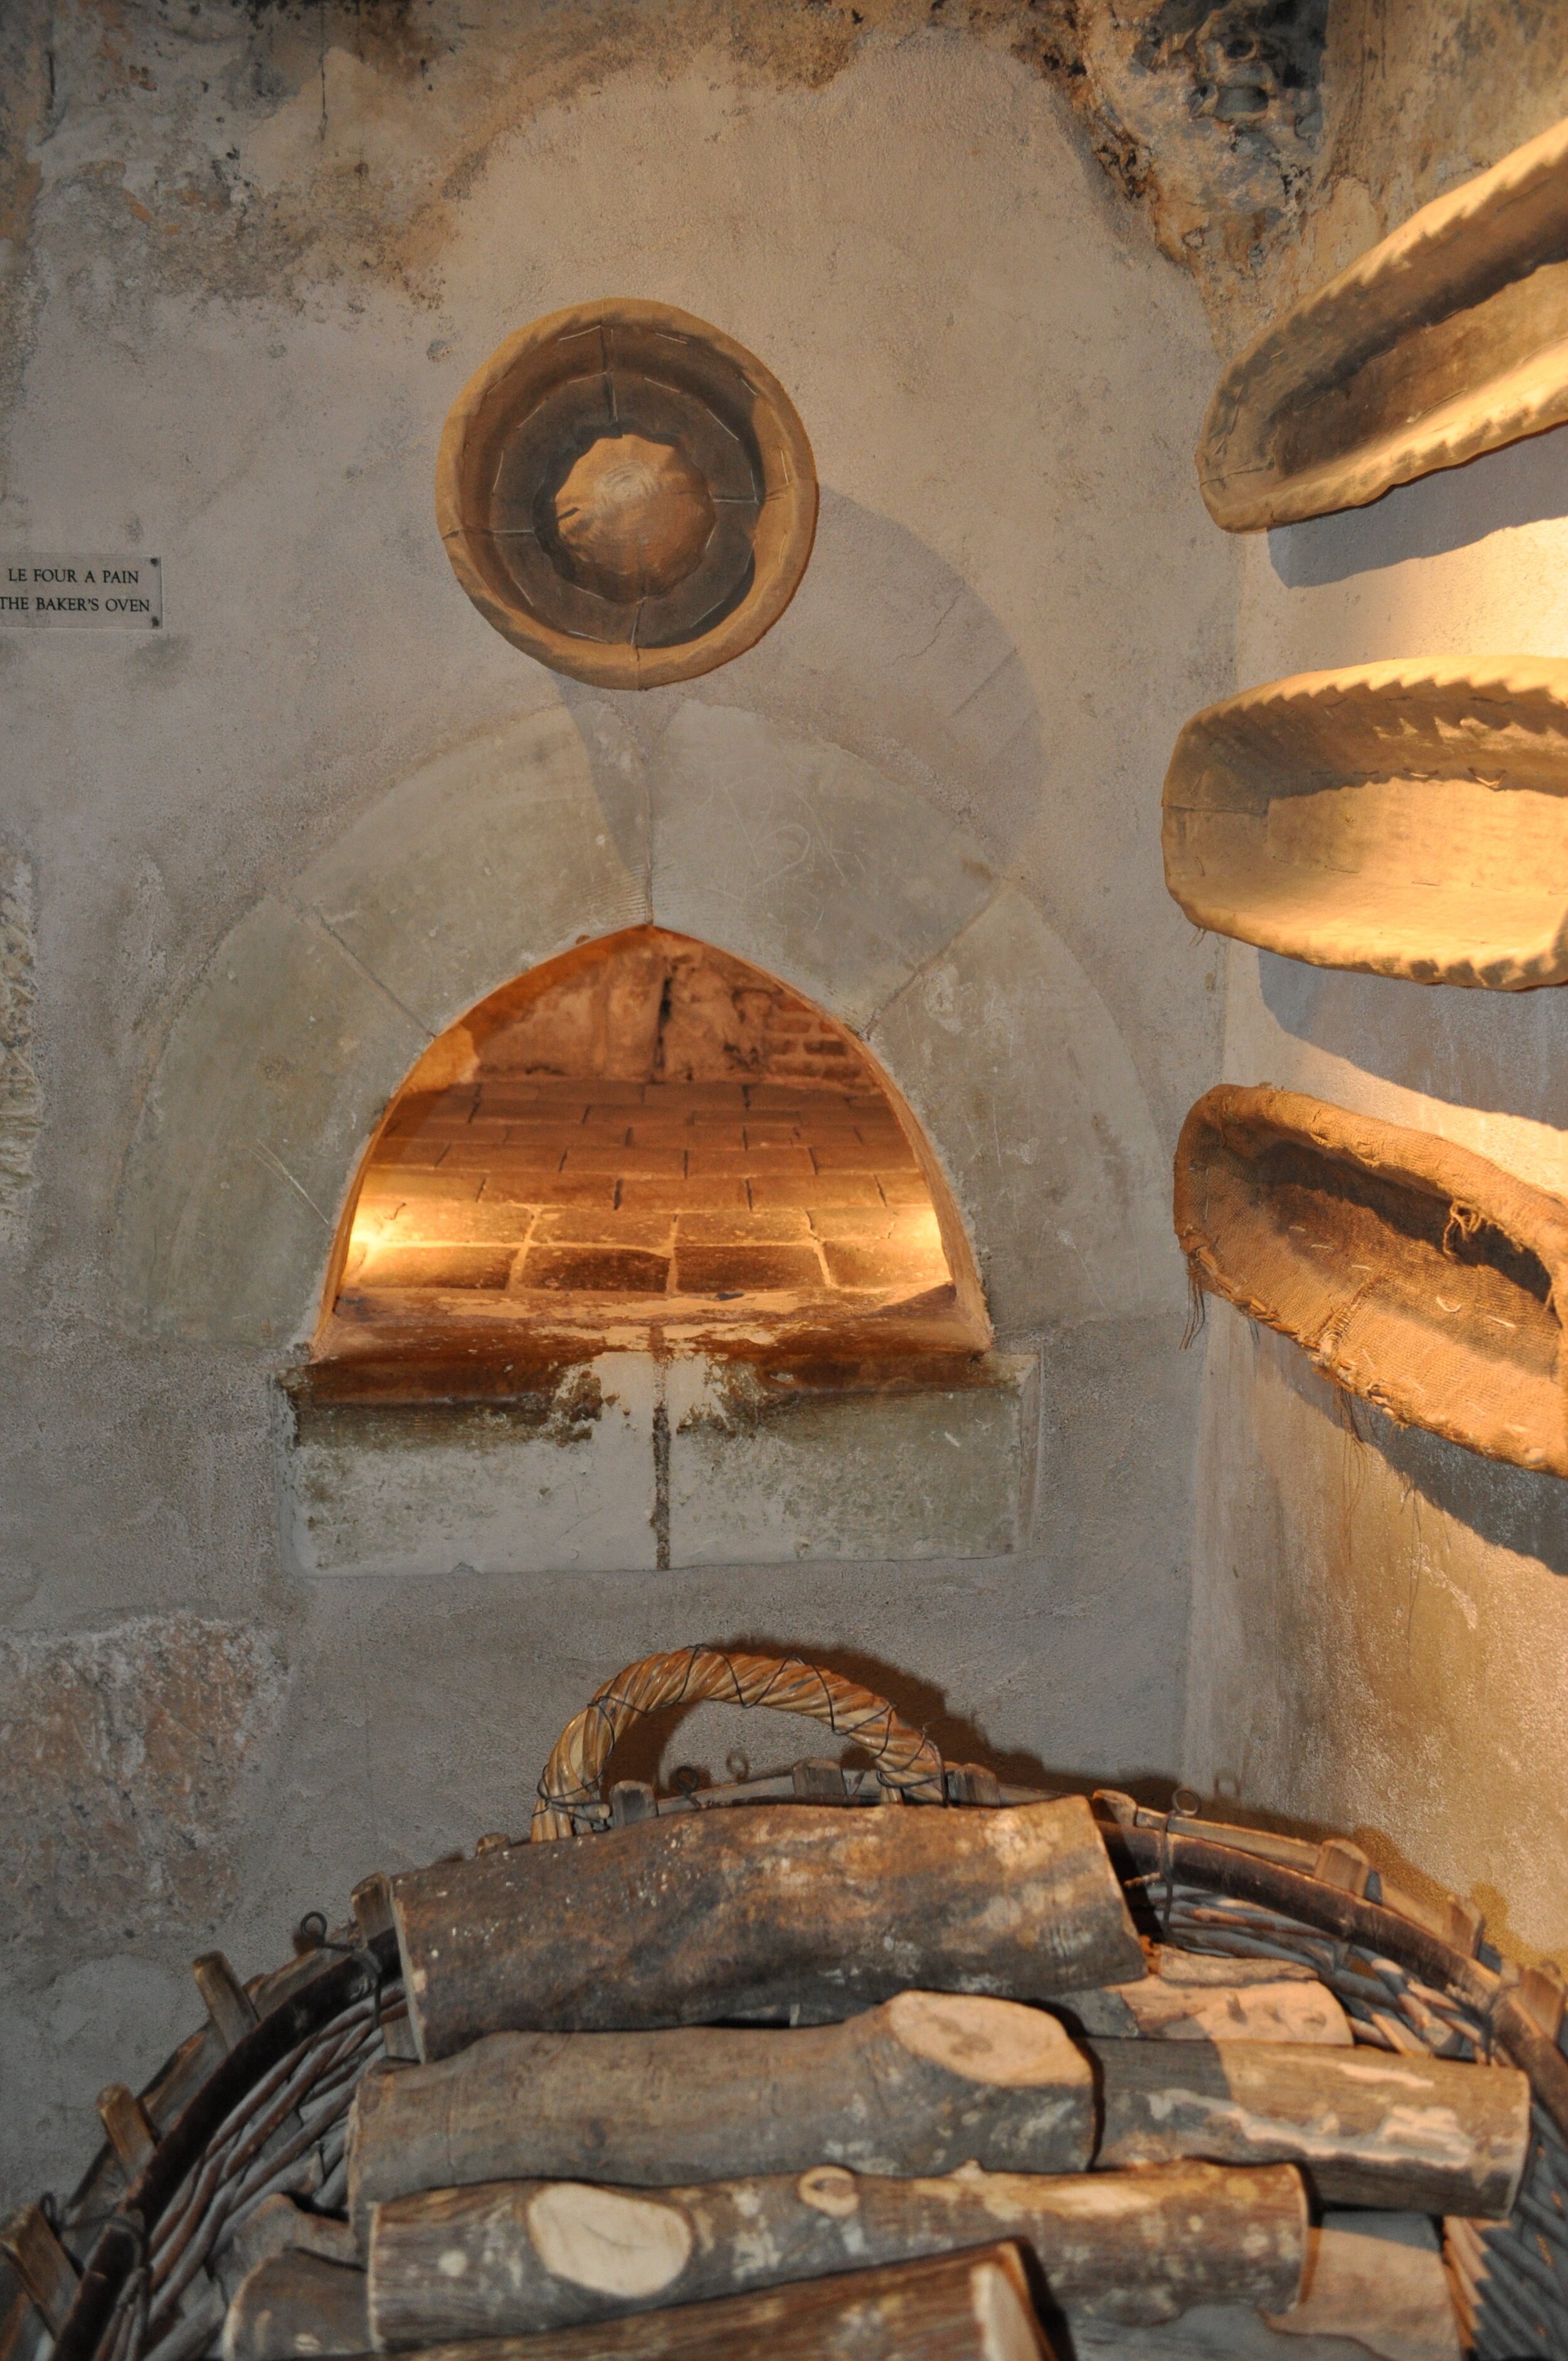 The bread oven at Chenonceau